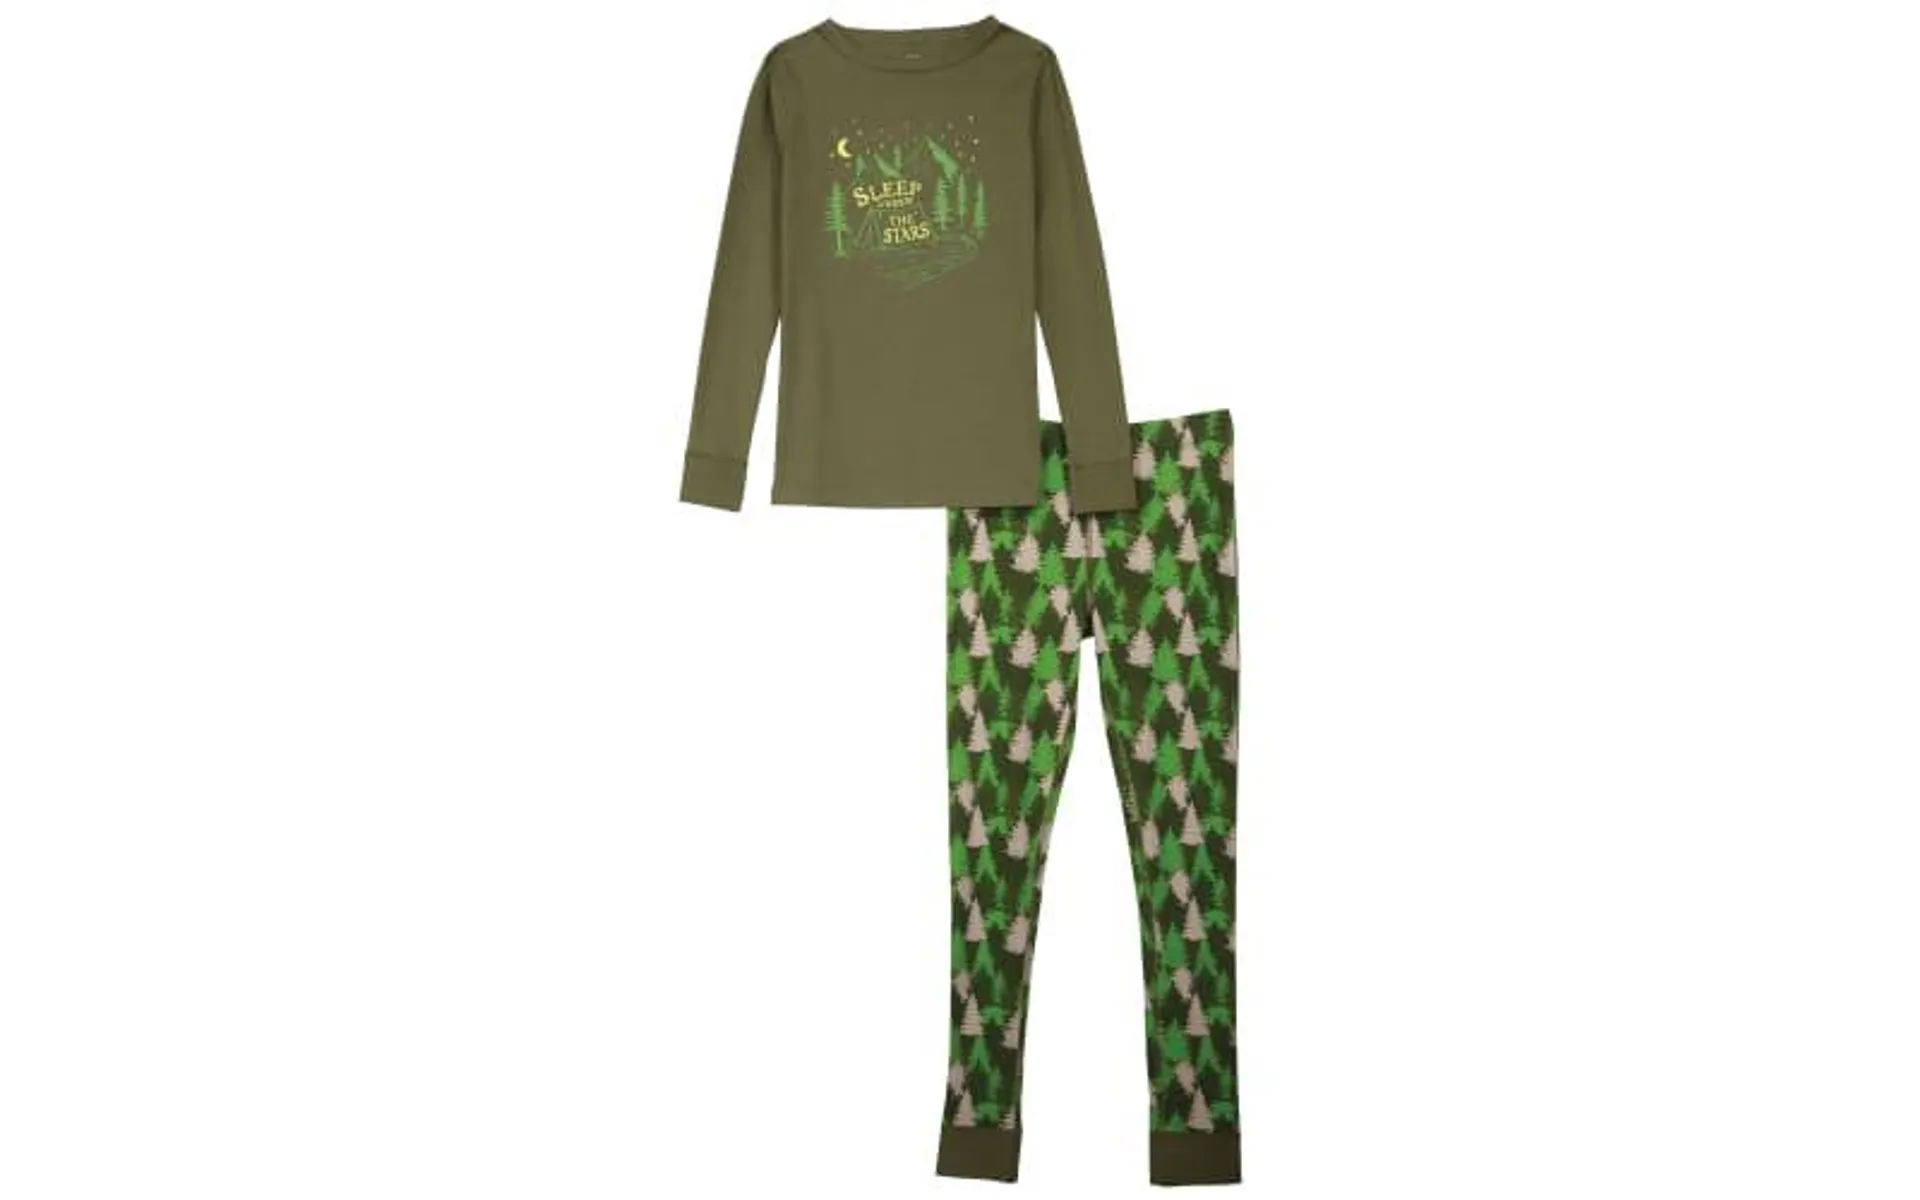 Outdoor Kids Snug Fit Pajama Set for Toddlers or Boys